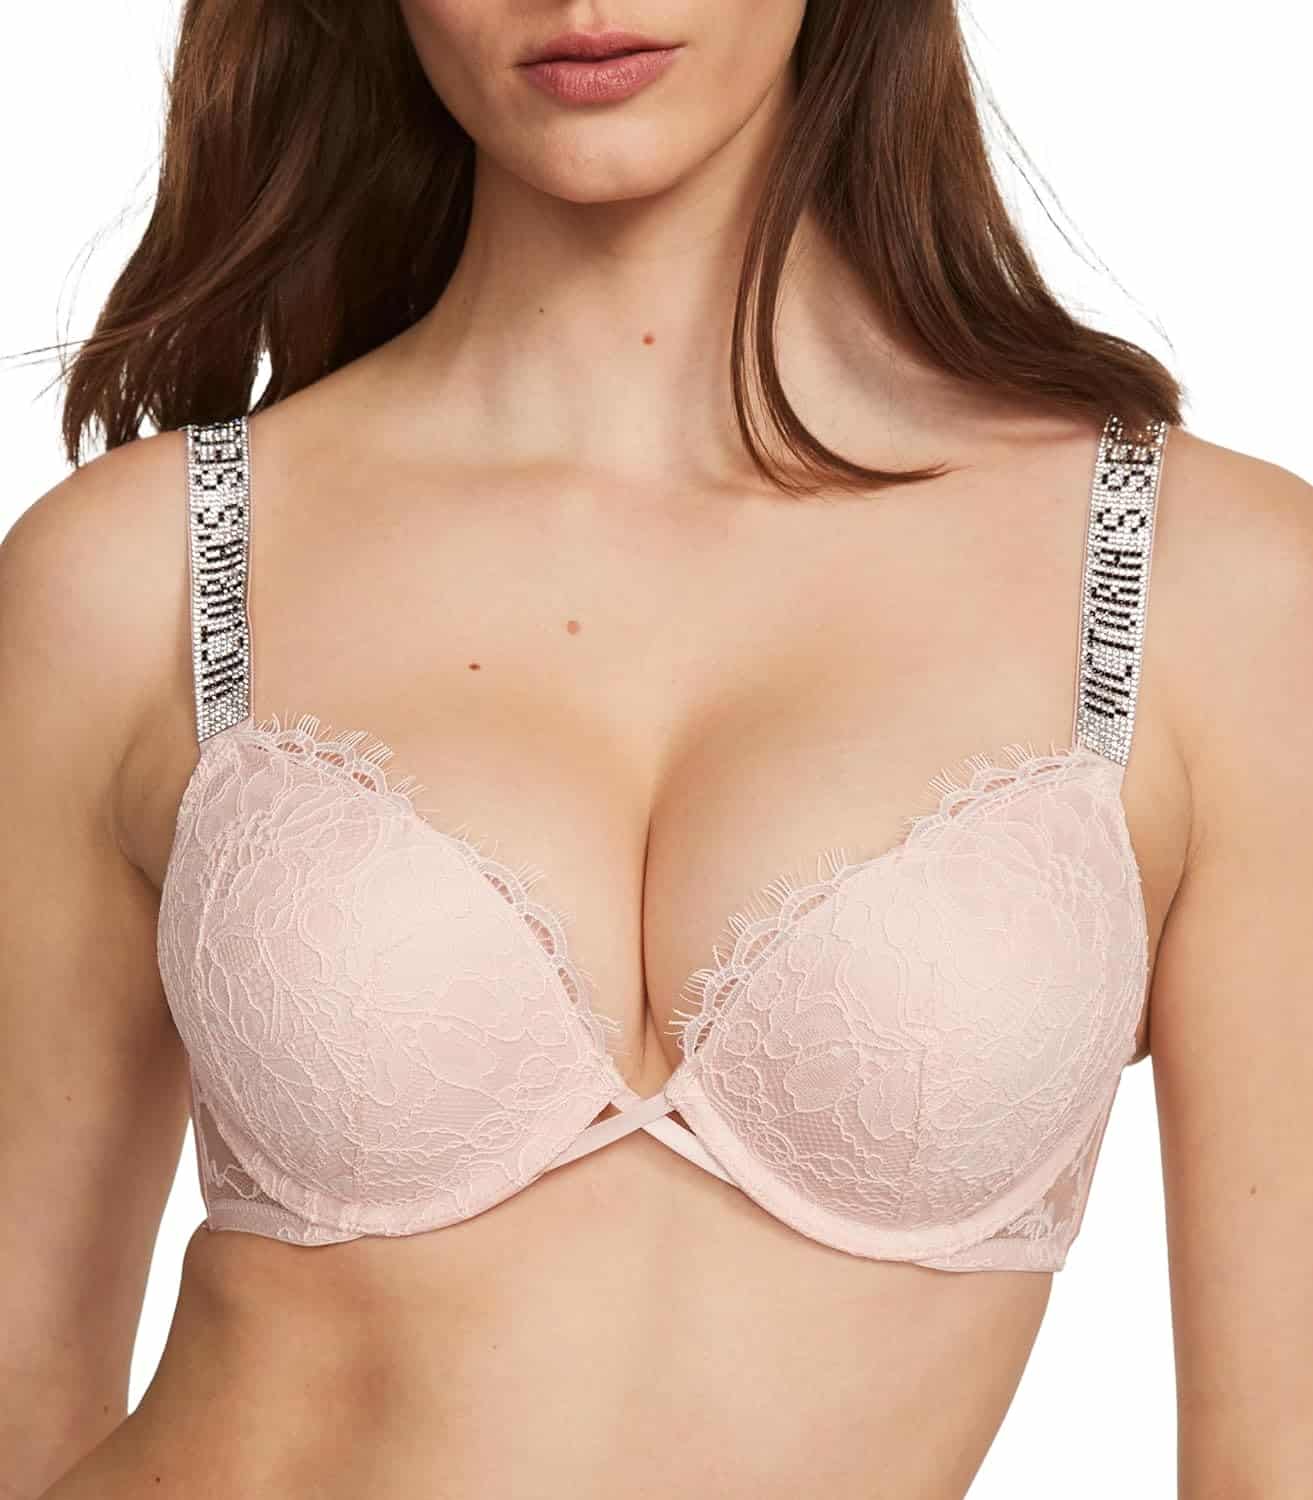 womens vrysxy bombshell lace shine strap rcyld push up bra review